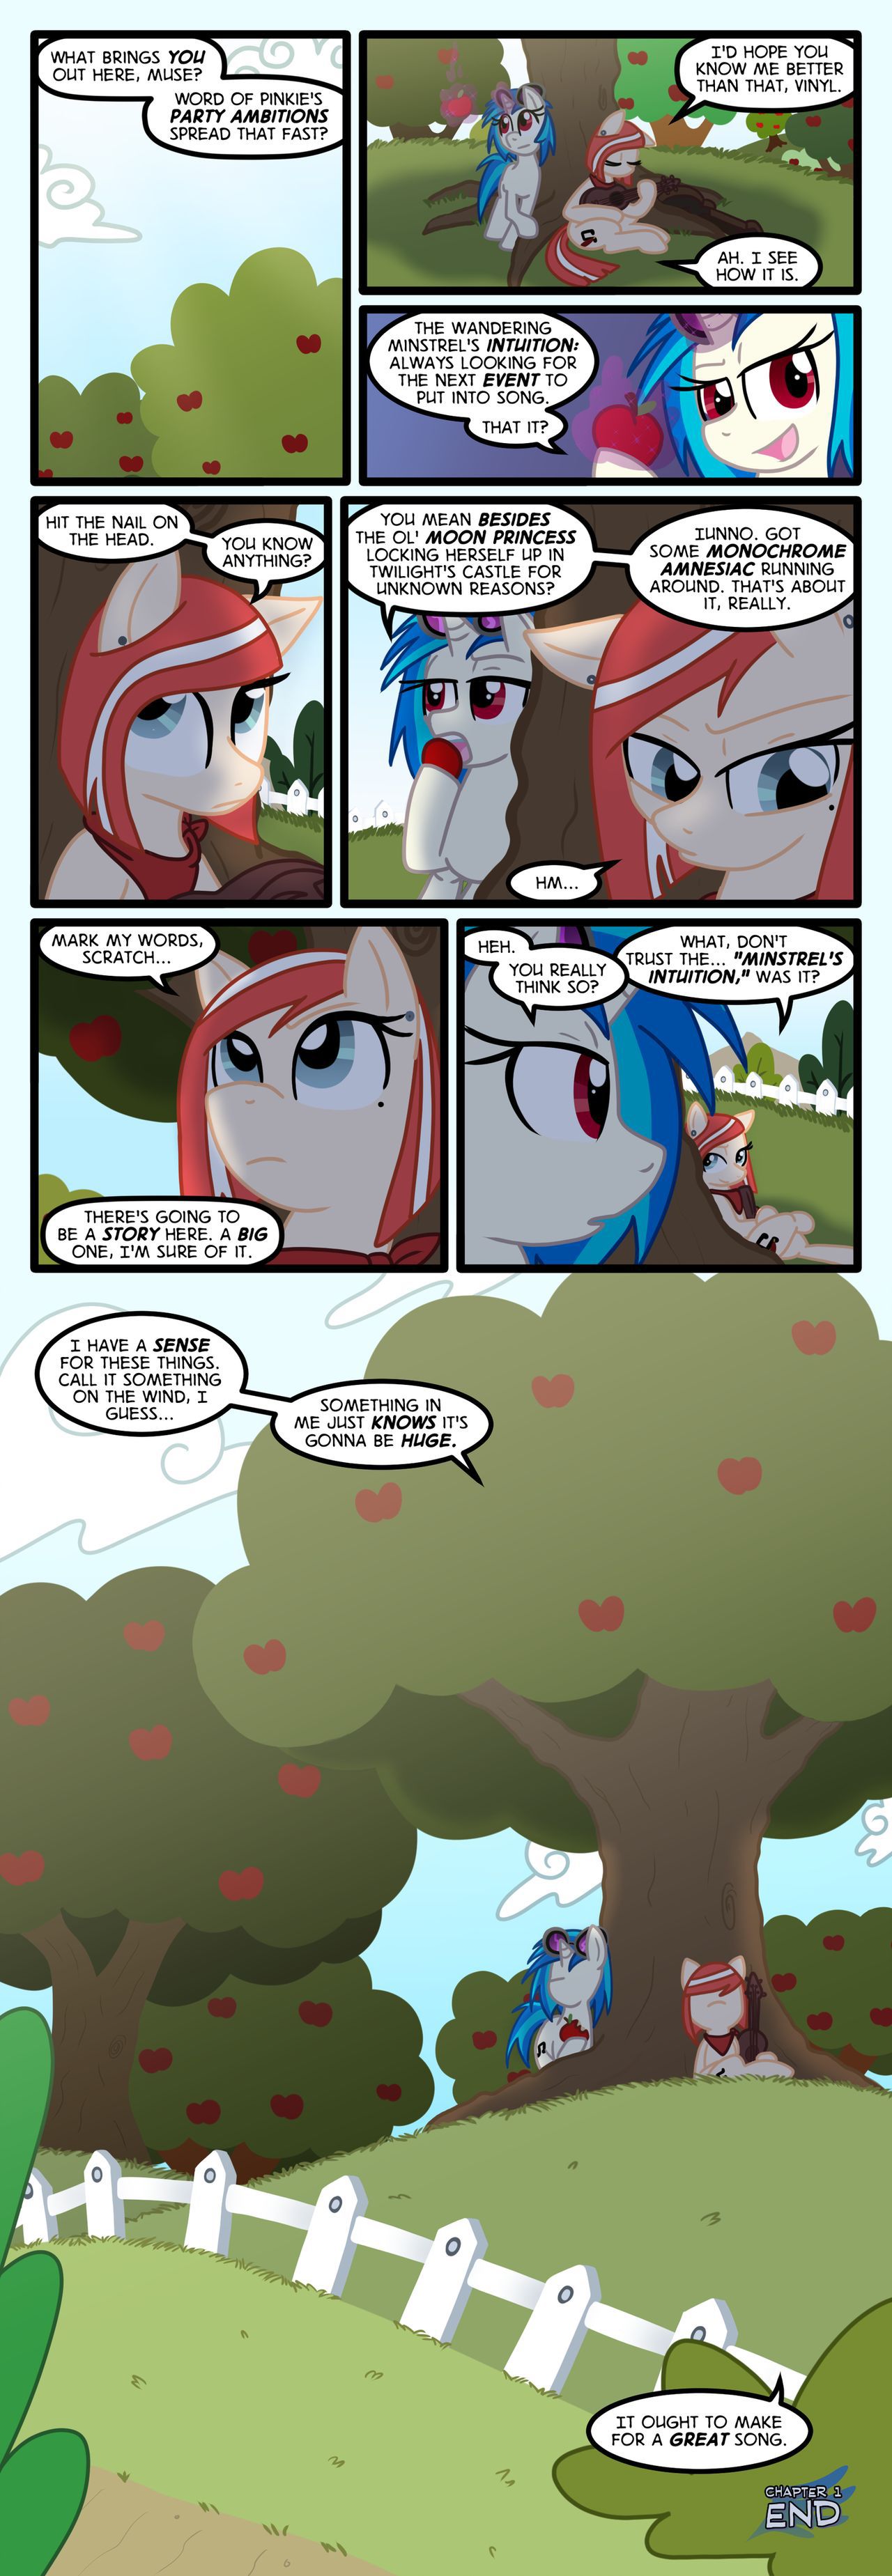 [Zaron] Lonely Hooves (My Little Pony Friendship Is Magic) [Ongoing] 71